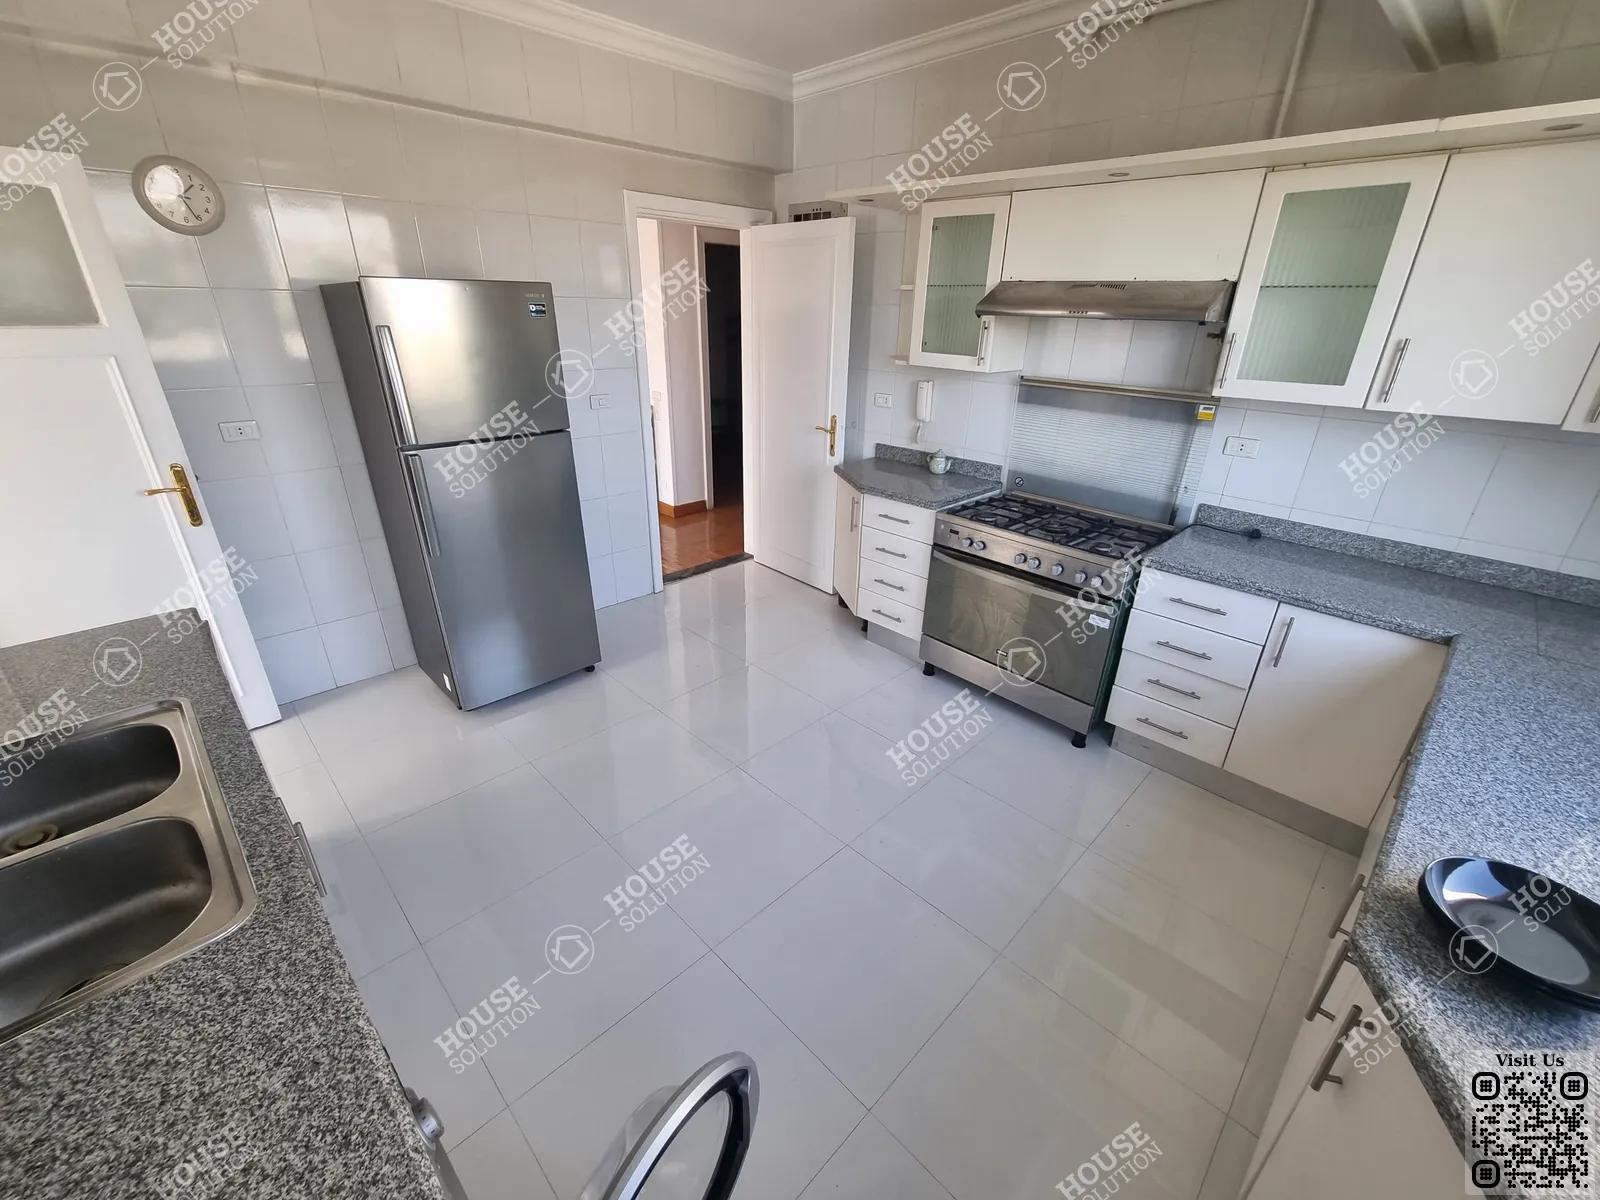 KITCHEN  @ Apartments For Rent In Maadi Maadi Sarayat Area: 165 m² consists of 3 Bedrooms 2 Bathrooms Modern furnished 5 stars #5702-2